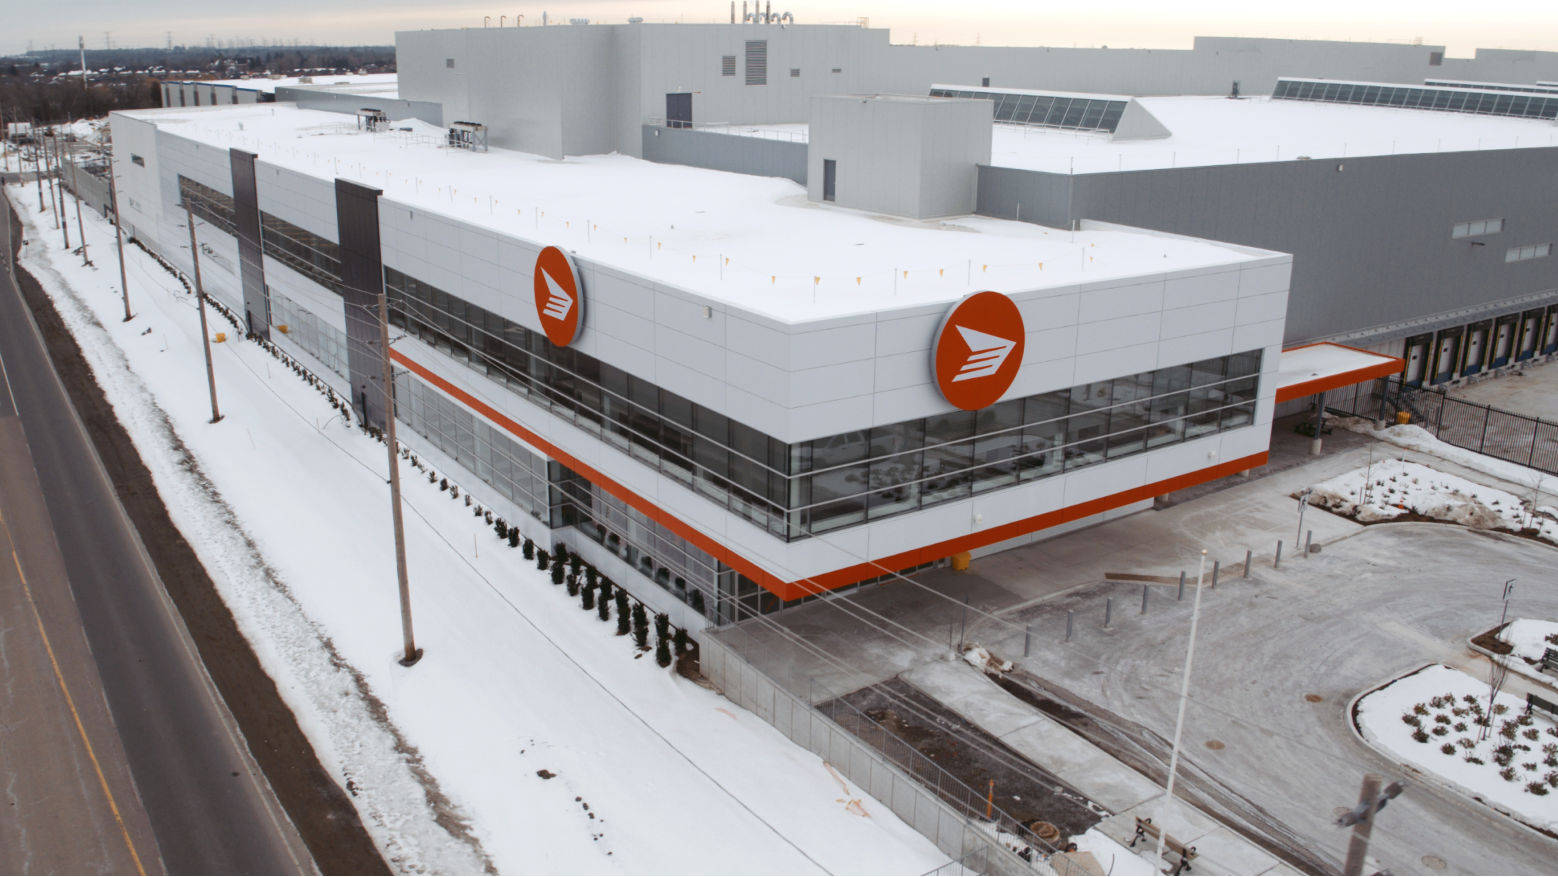 Aerial view of the Albert Jackson Processing Centre in the winter